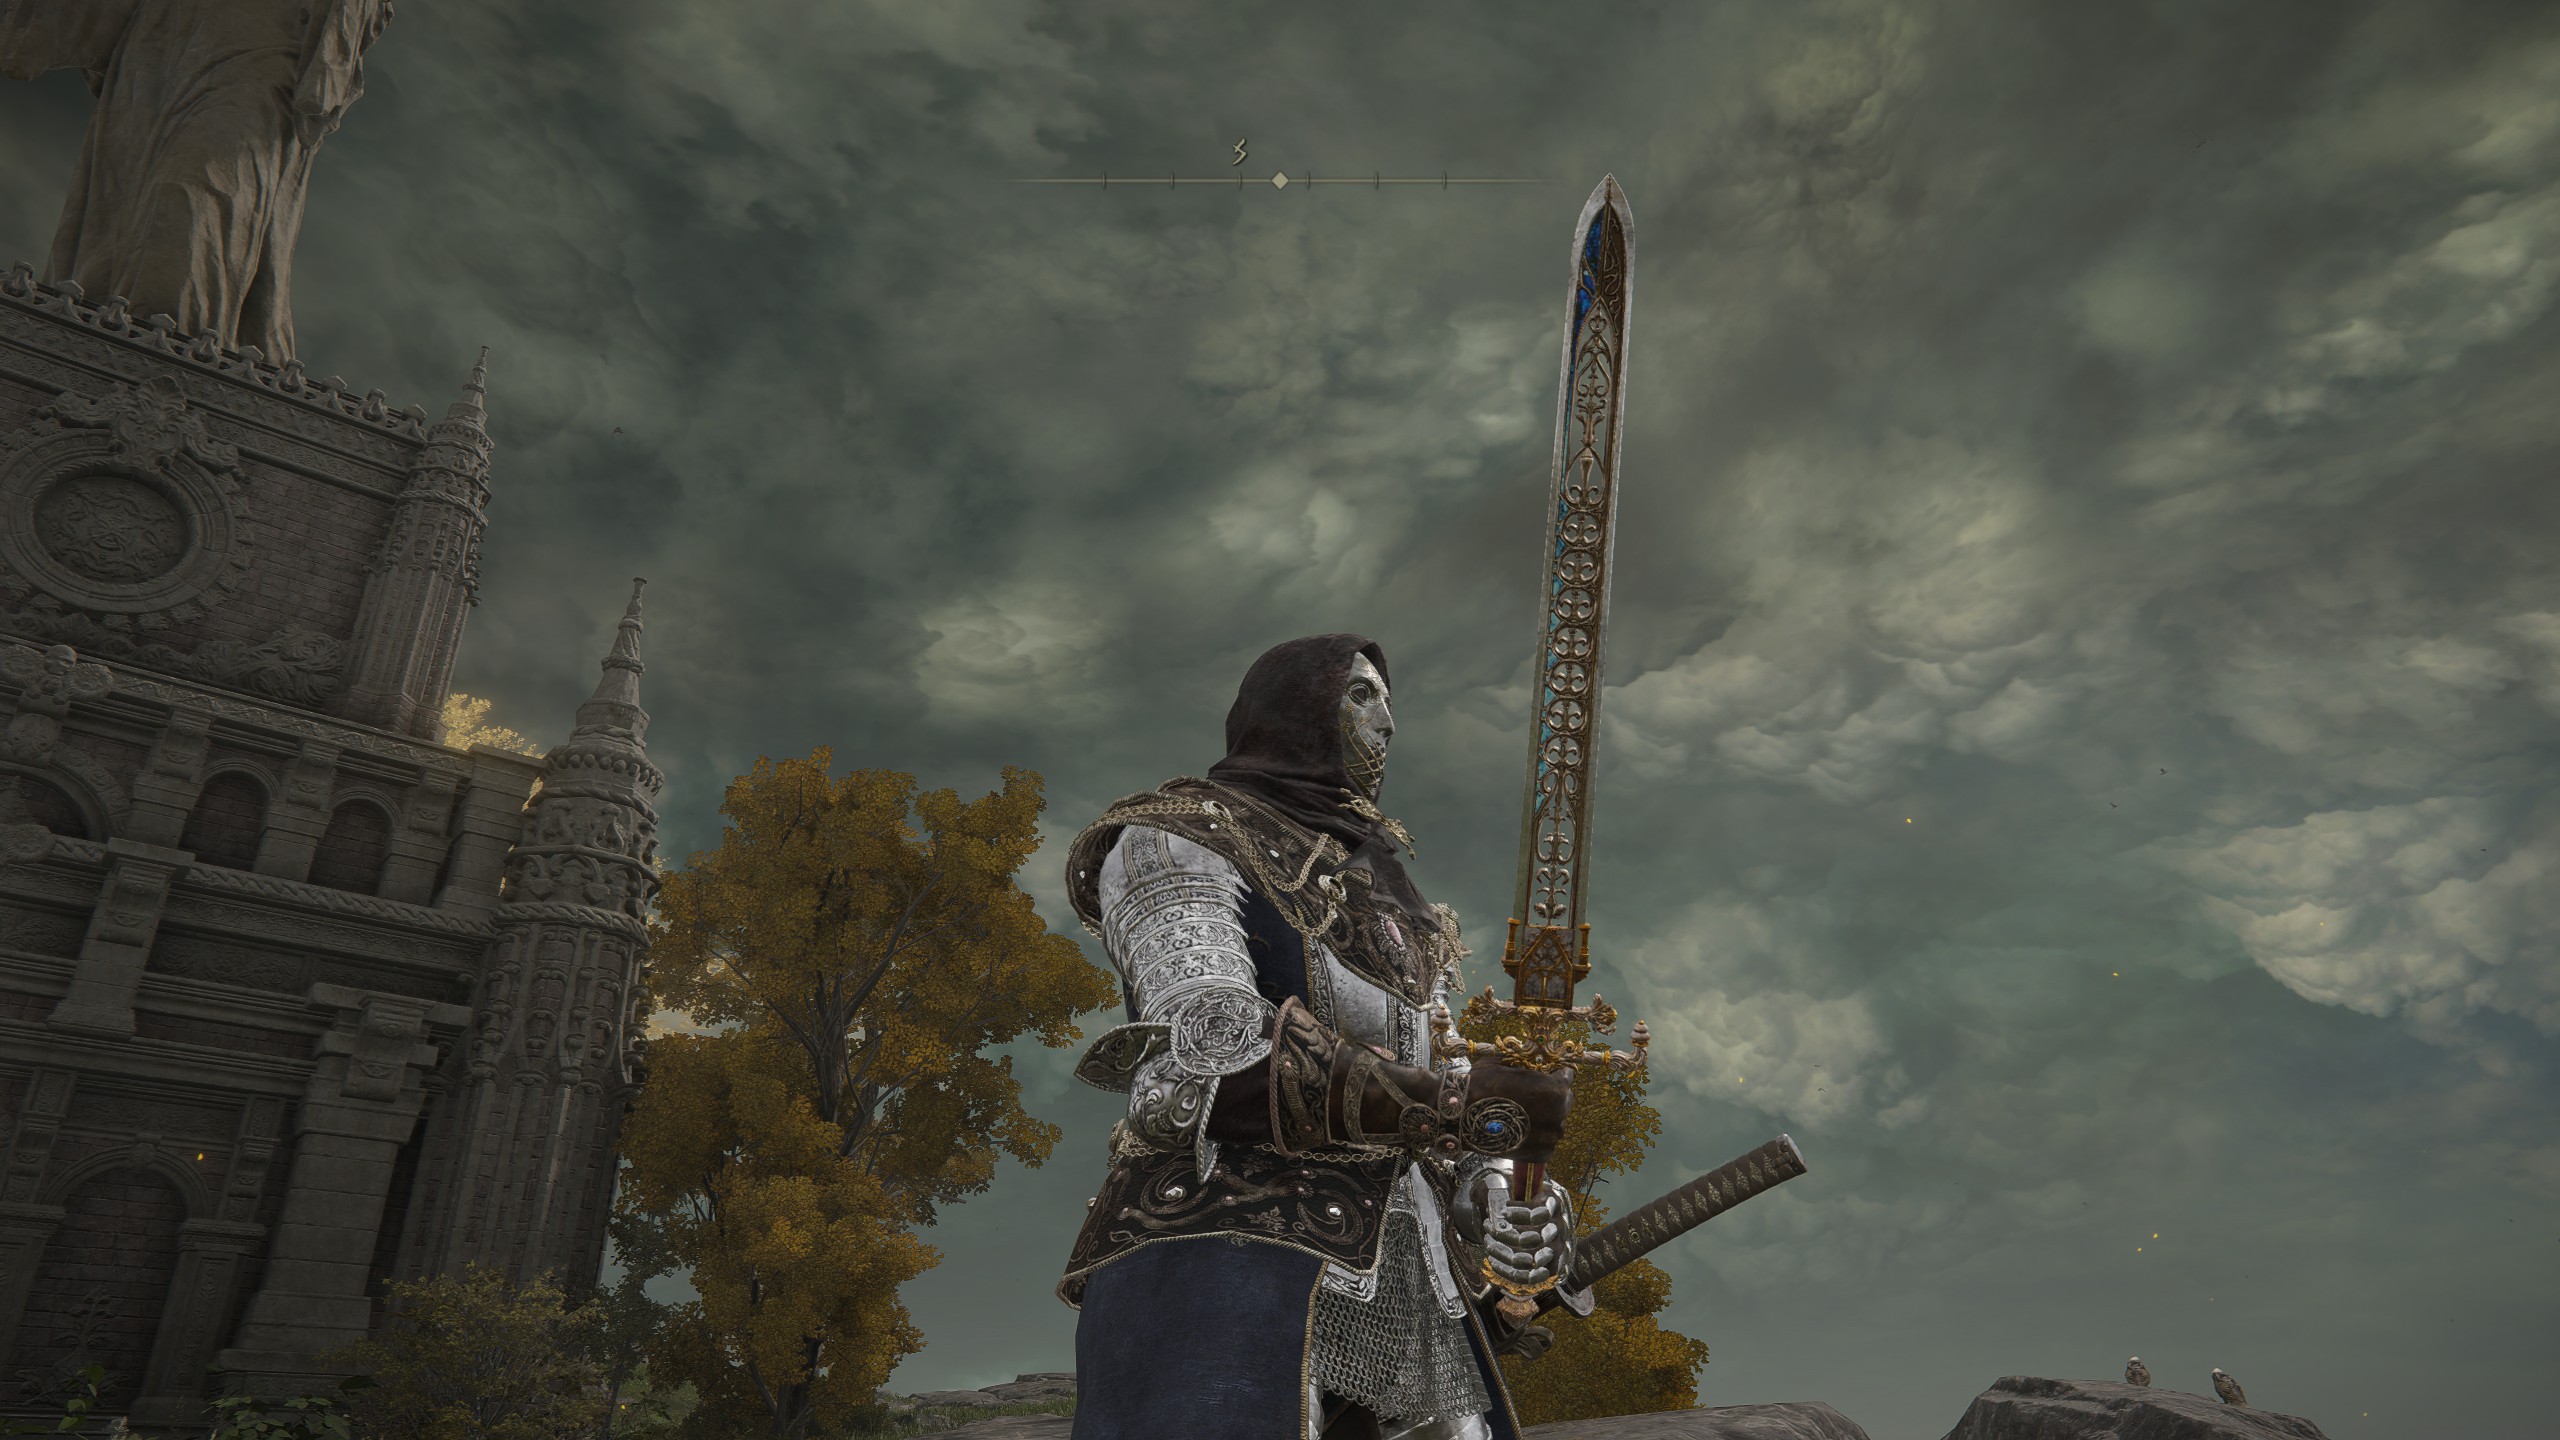 Taking a photo with the Sword of Night and Flame